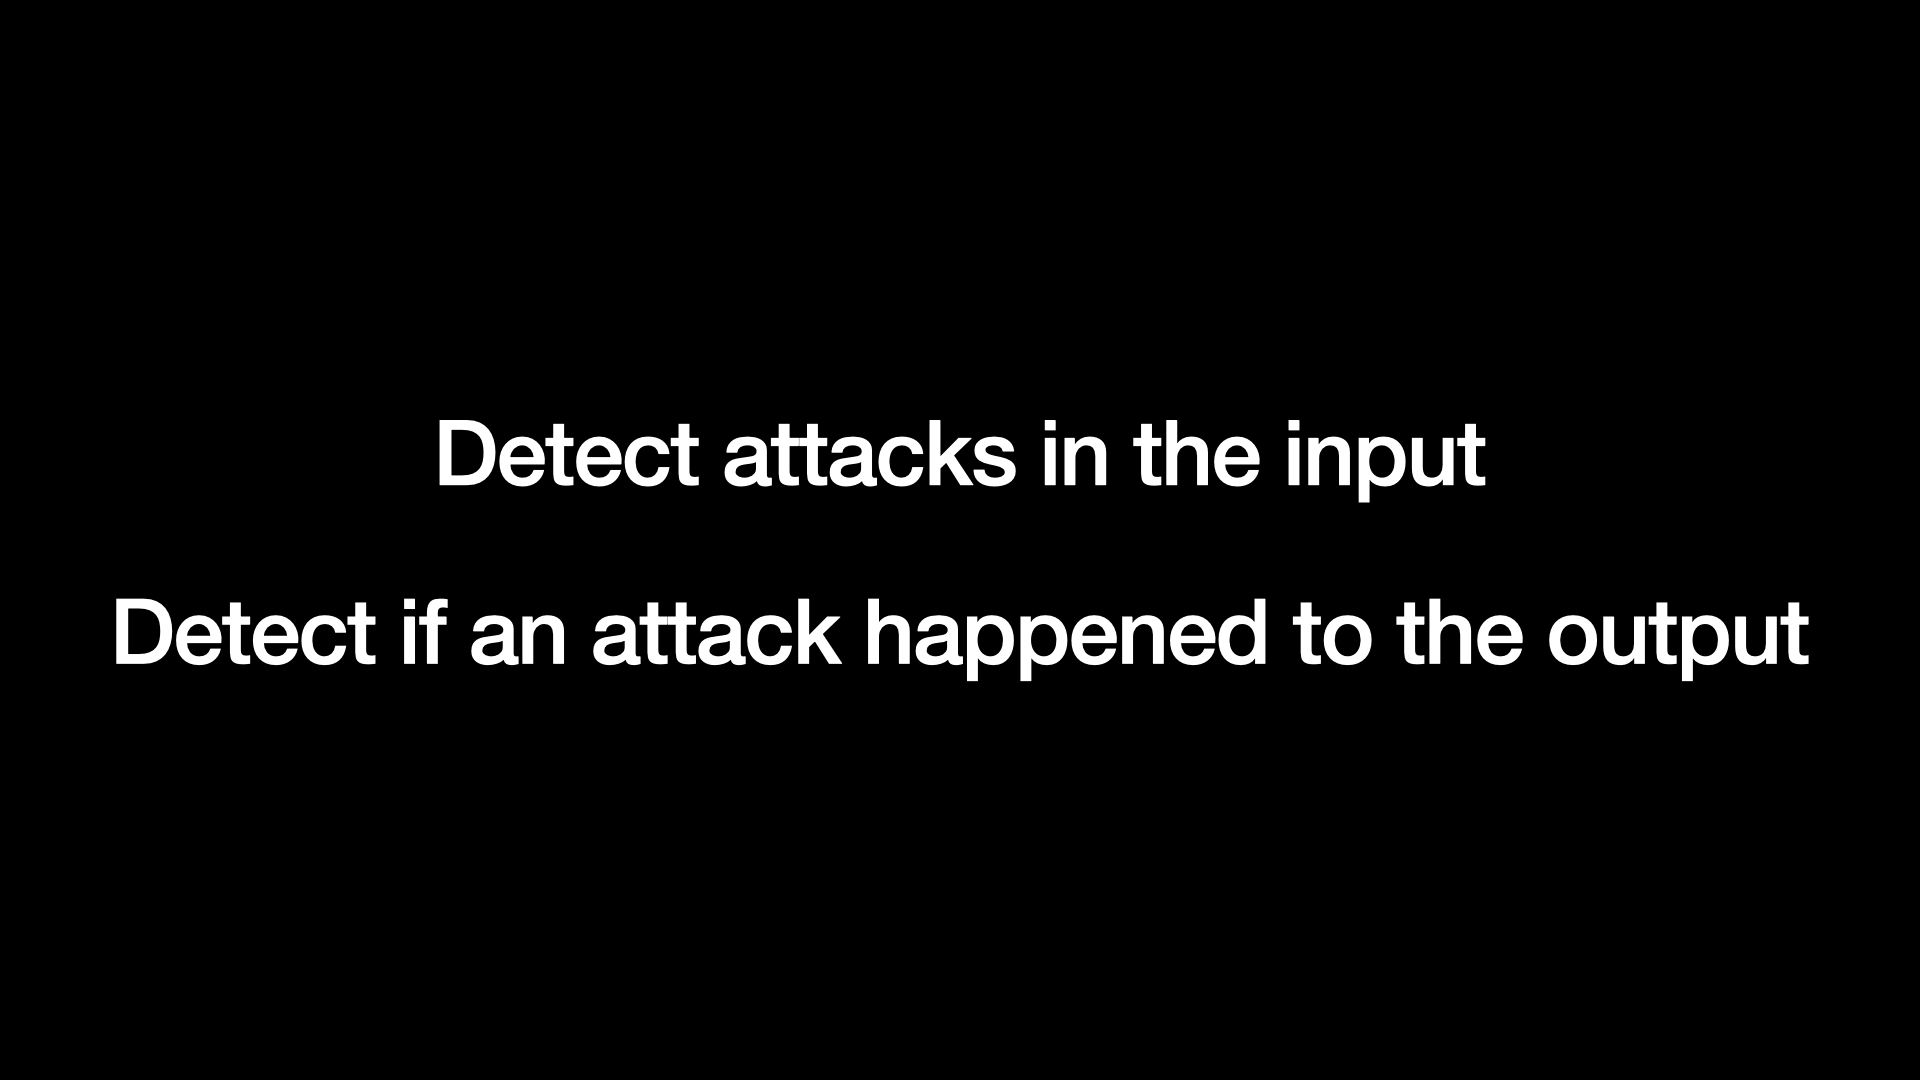 Detect attacks in the input. Detect if an attack happened to the output.